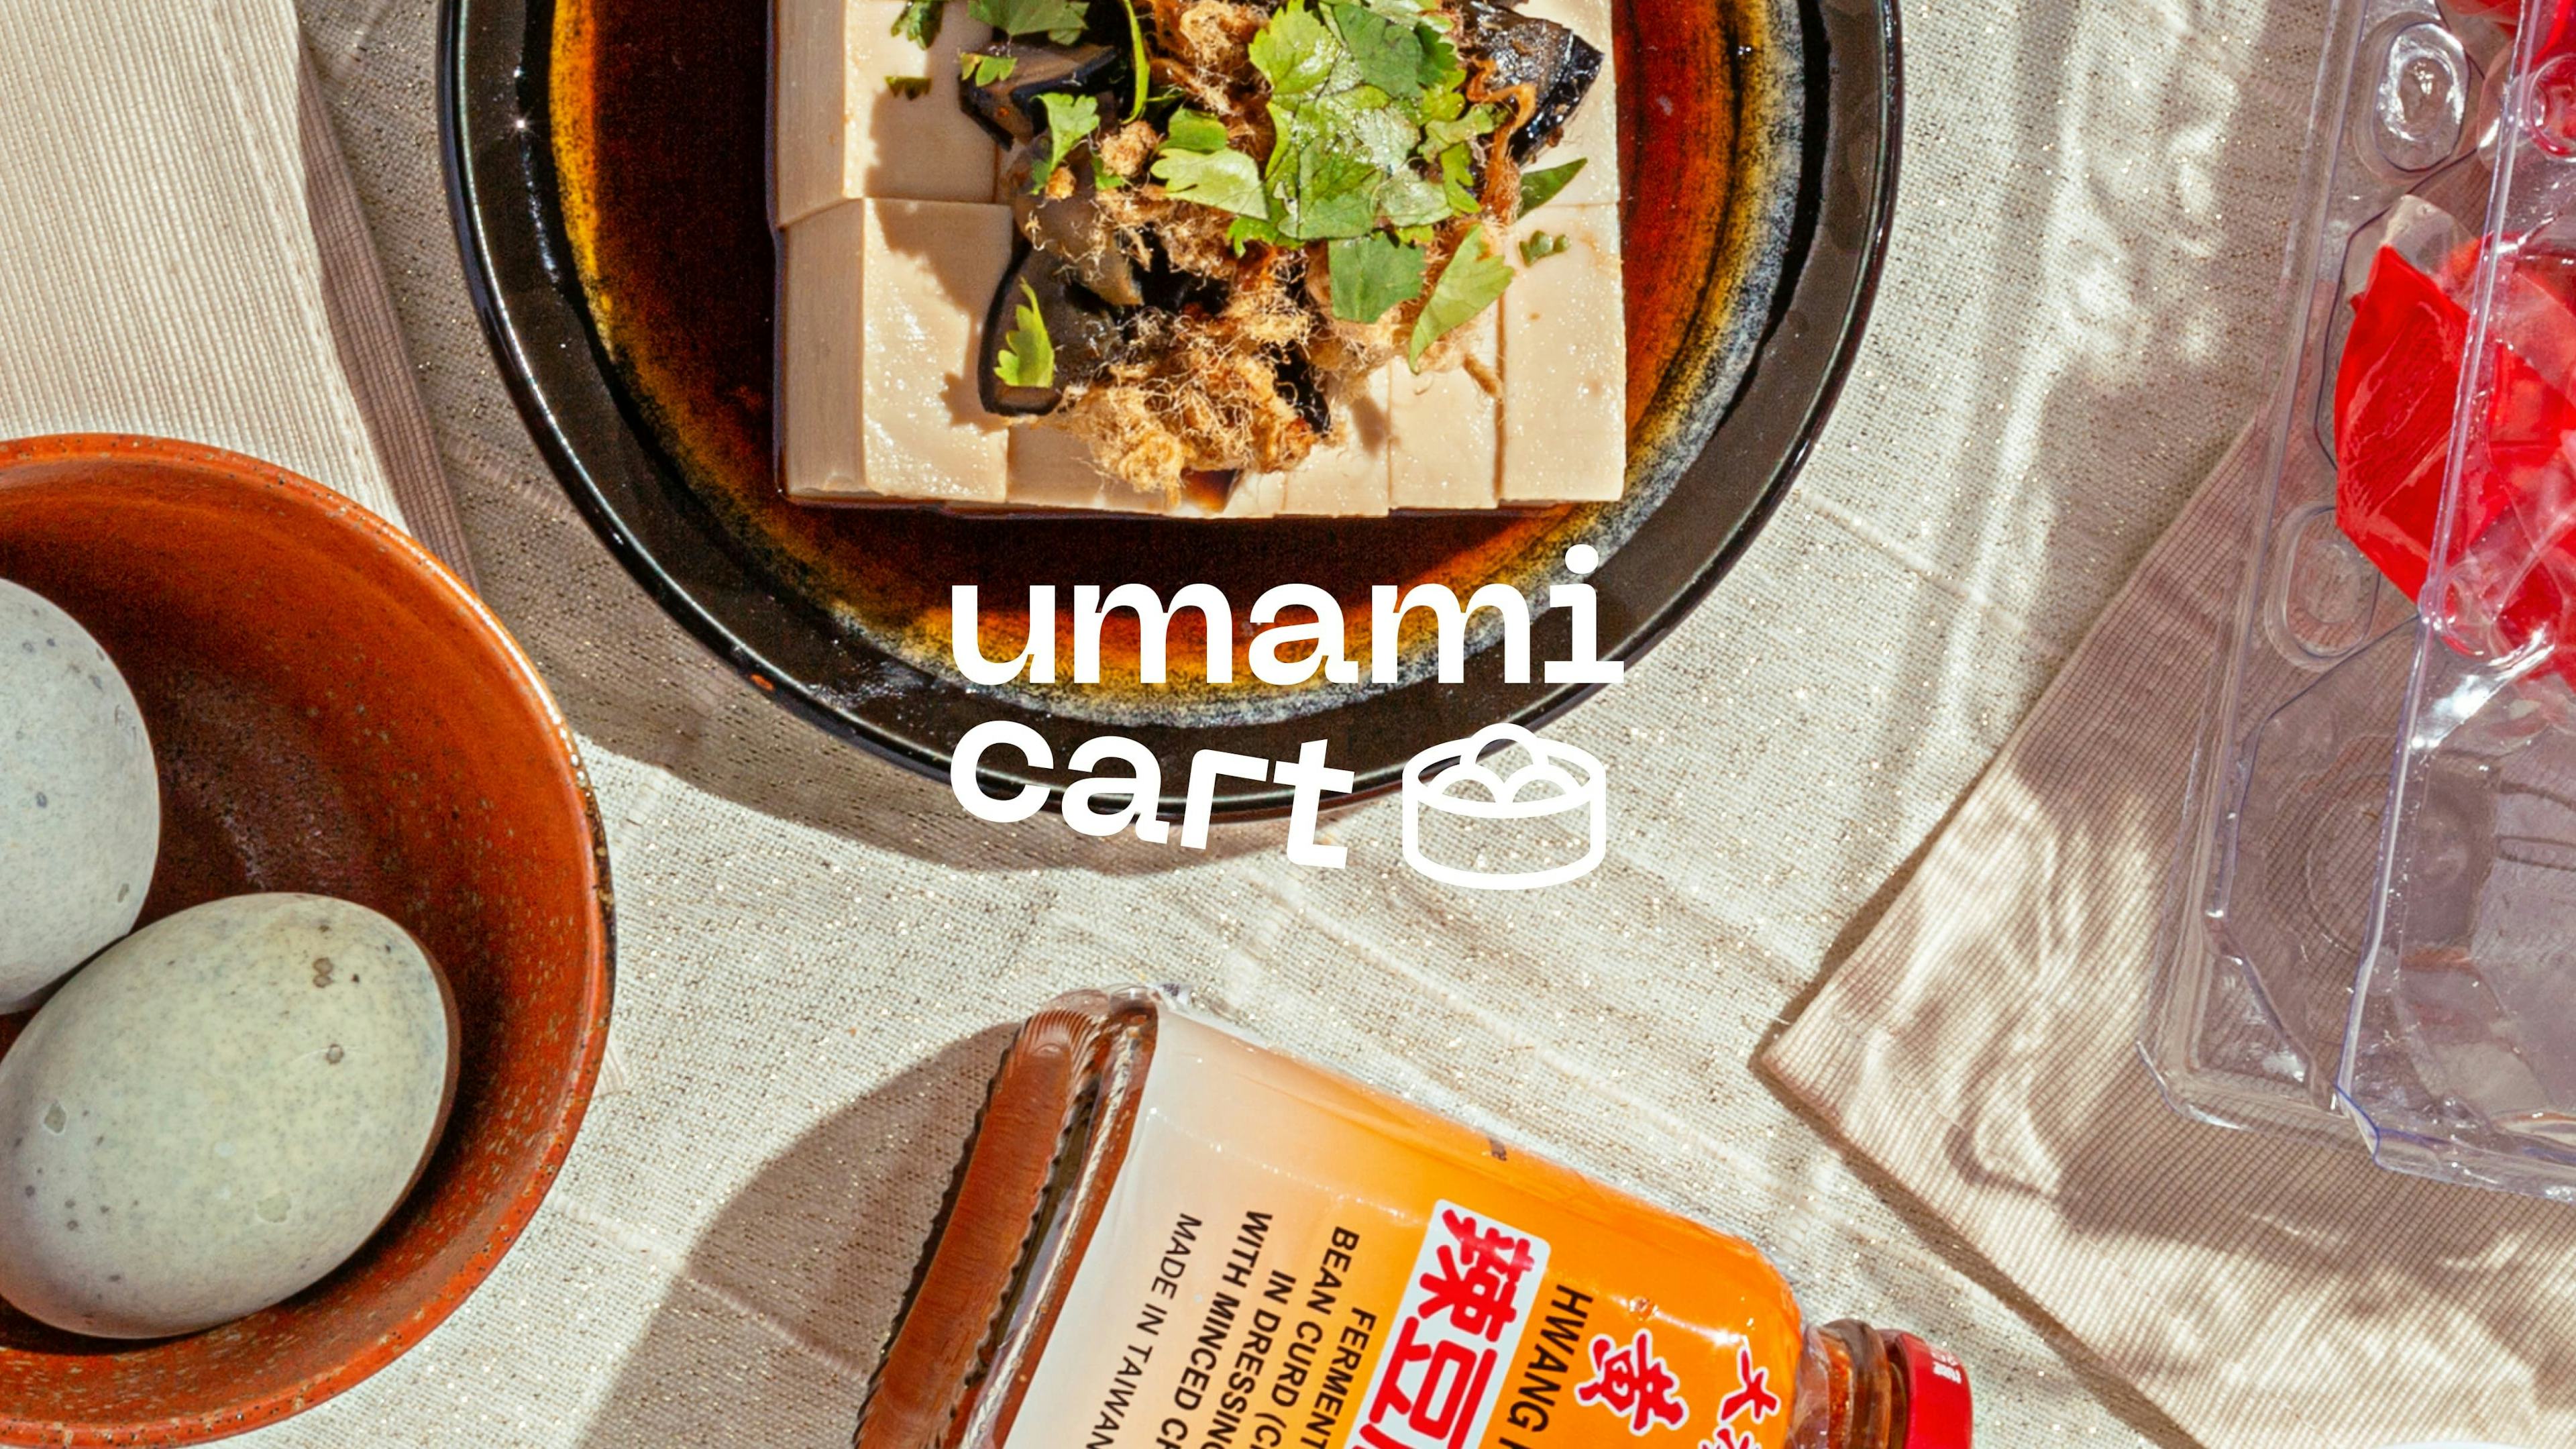 Responsive design and development for Umamicart, an online Asian grocery store that delivers directly to customer’s doors.